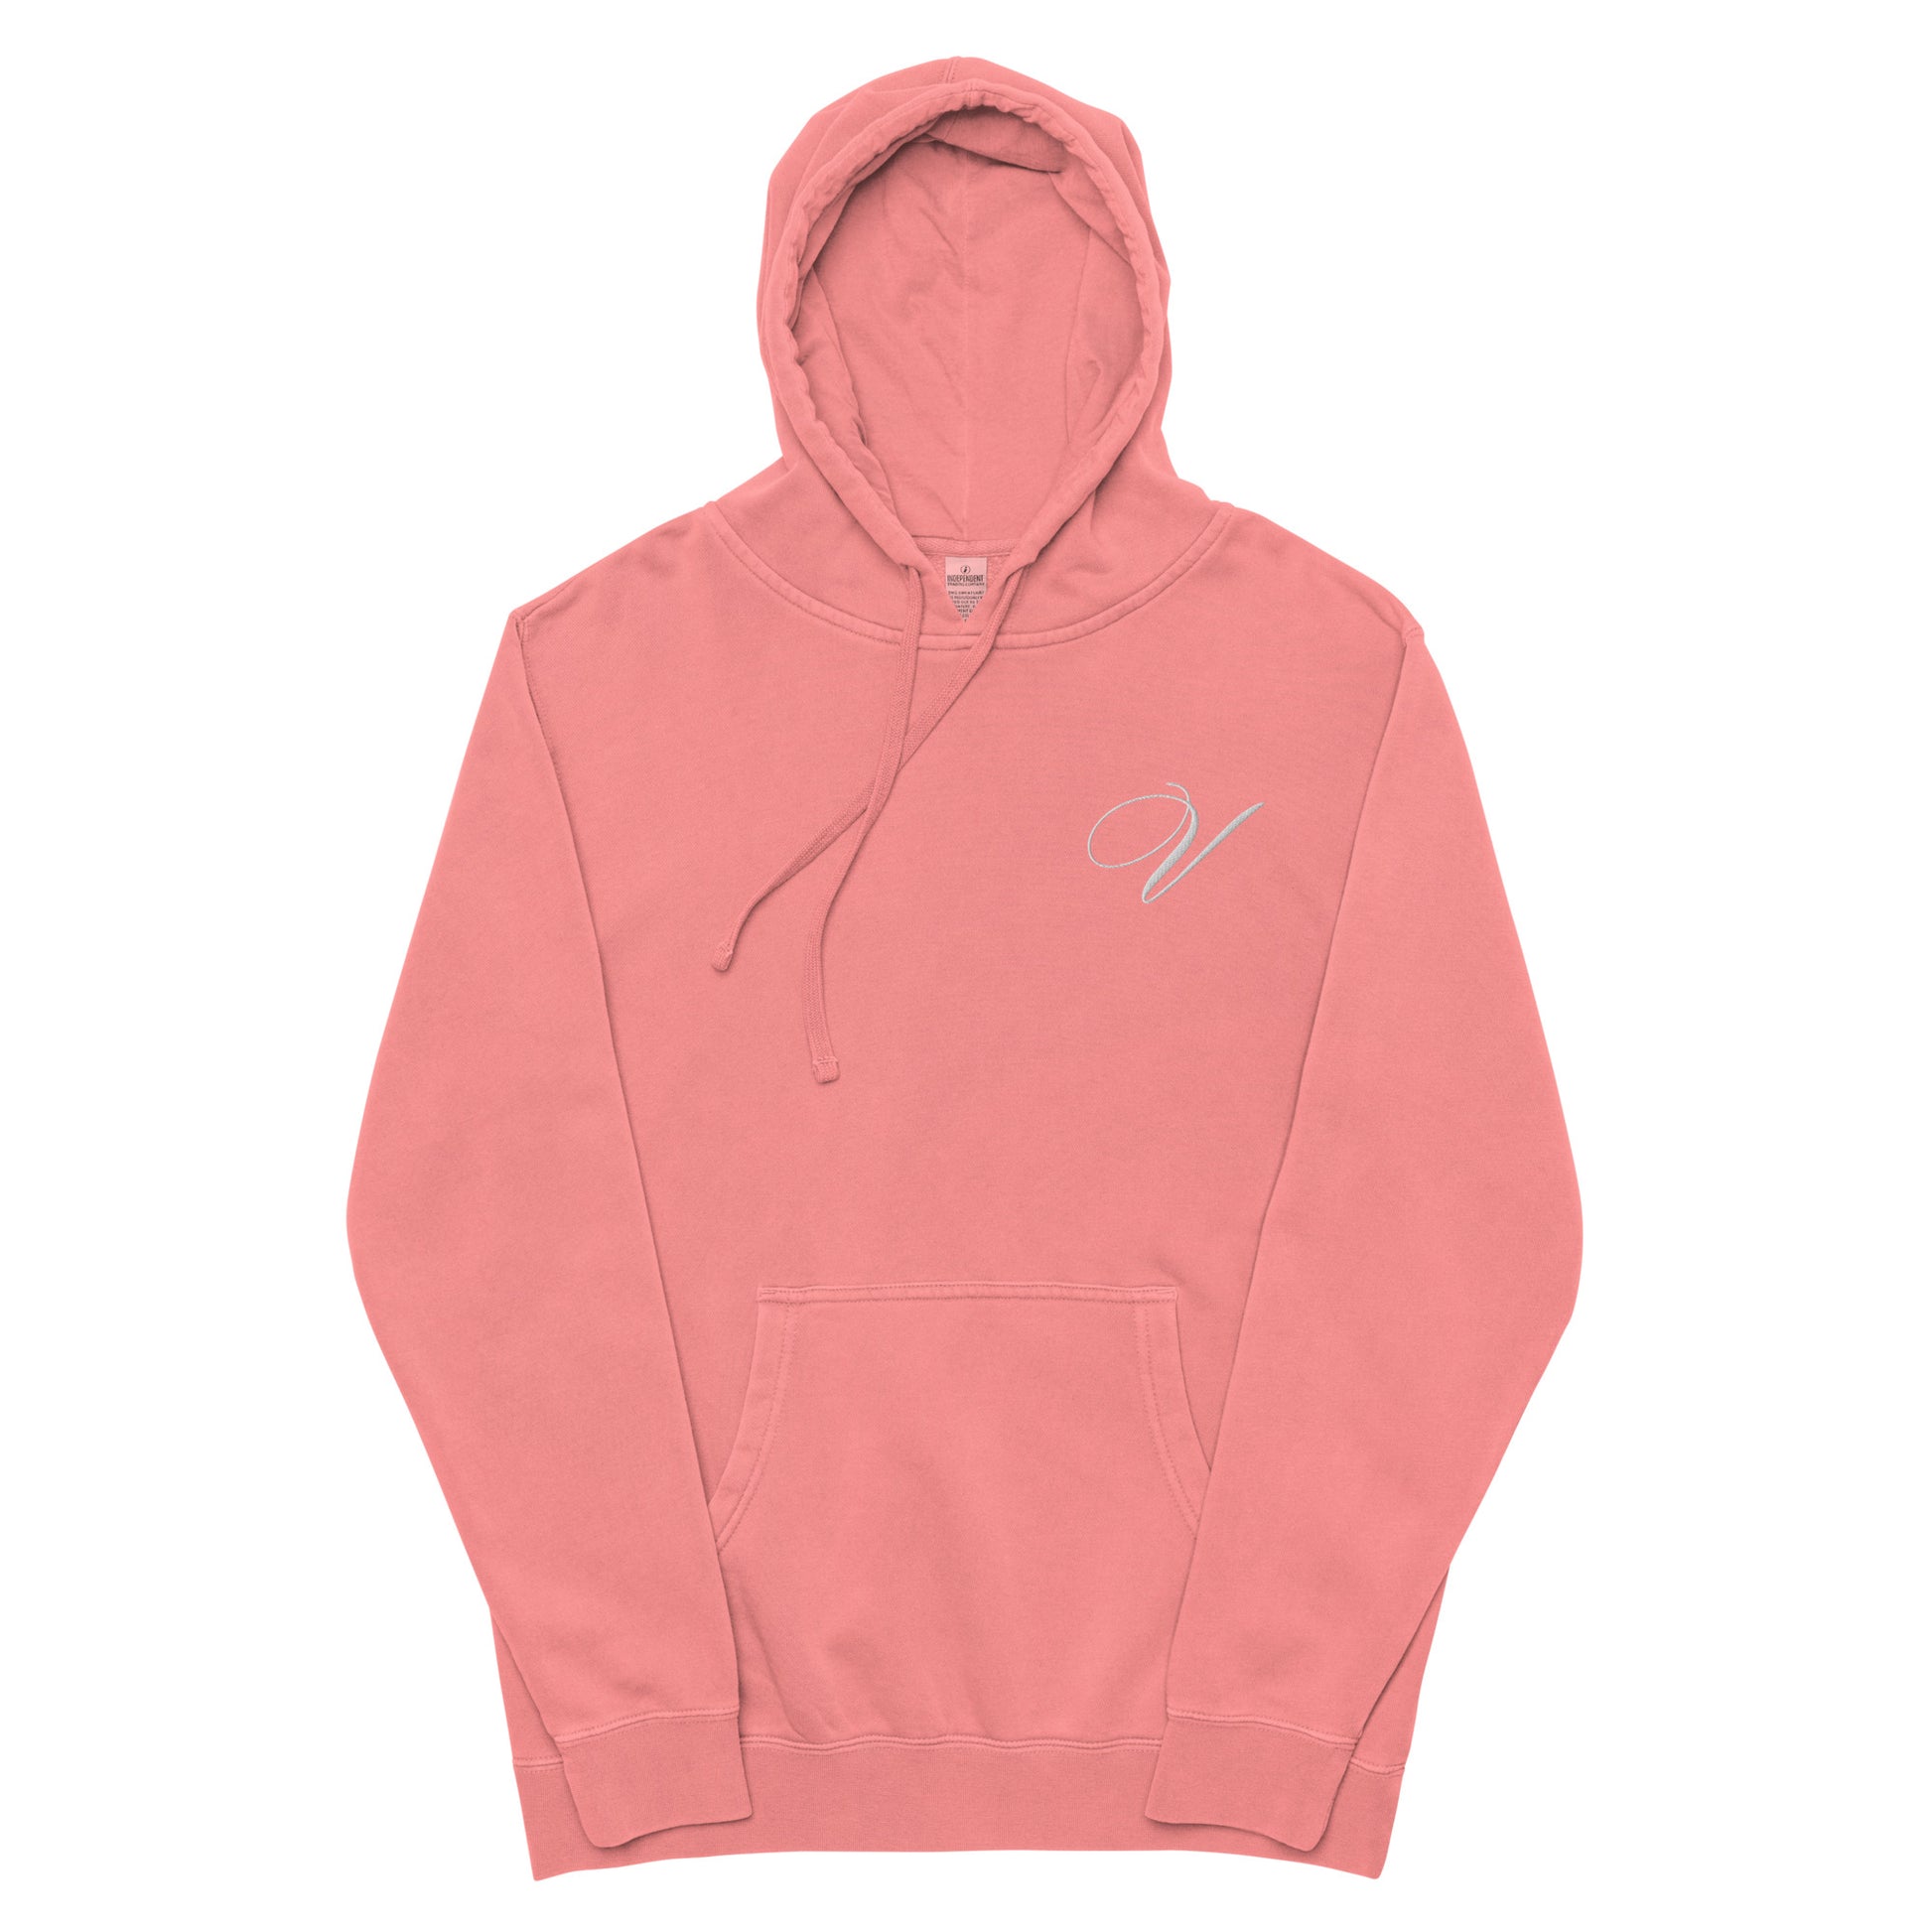 antique rose hoodie front